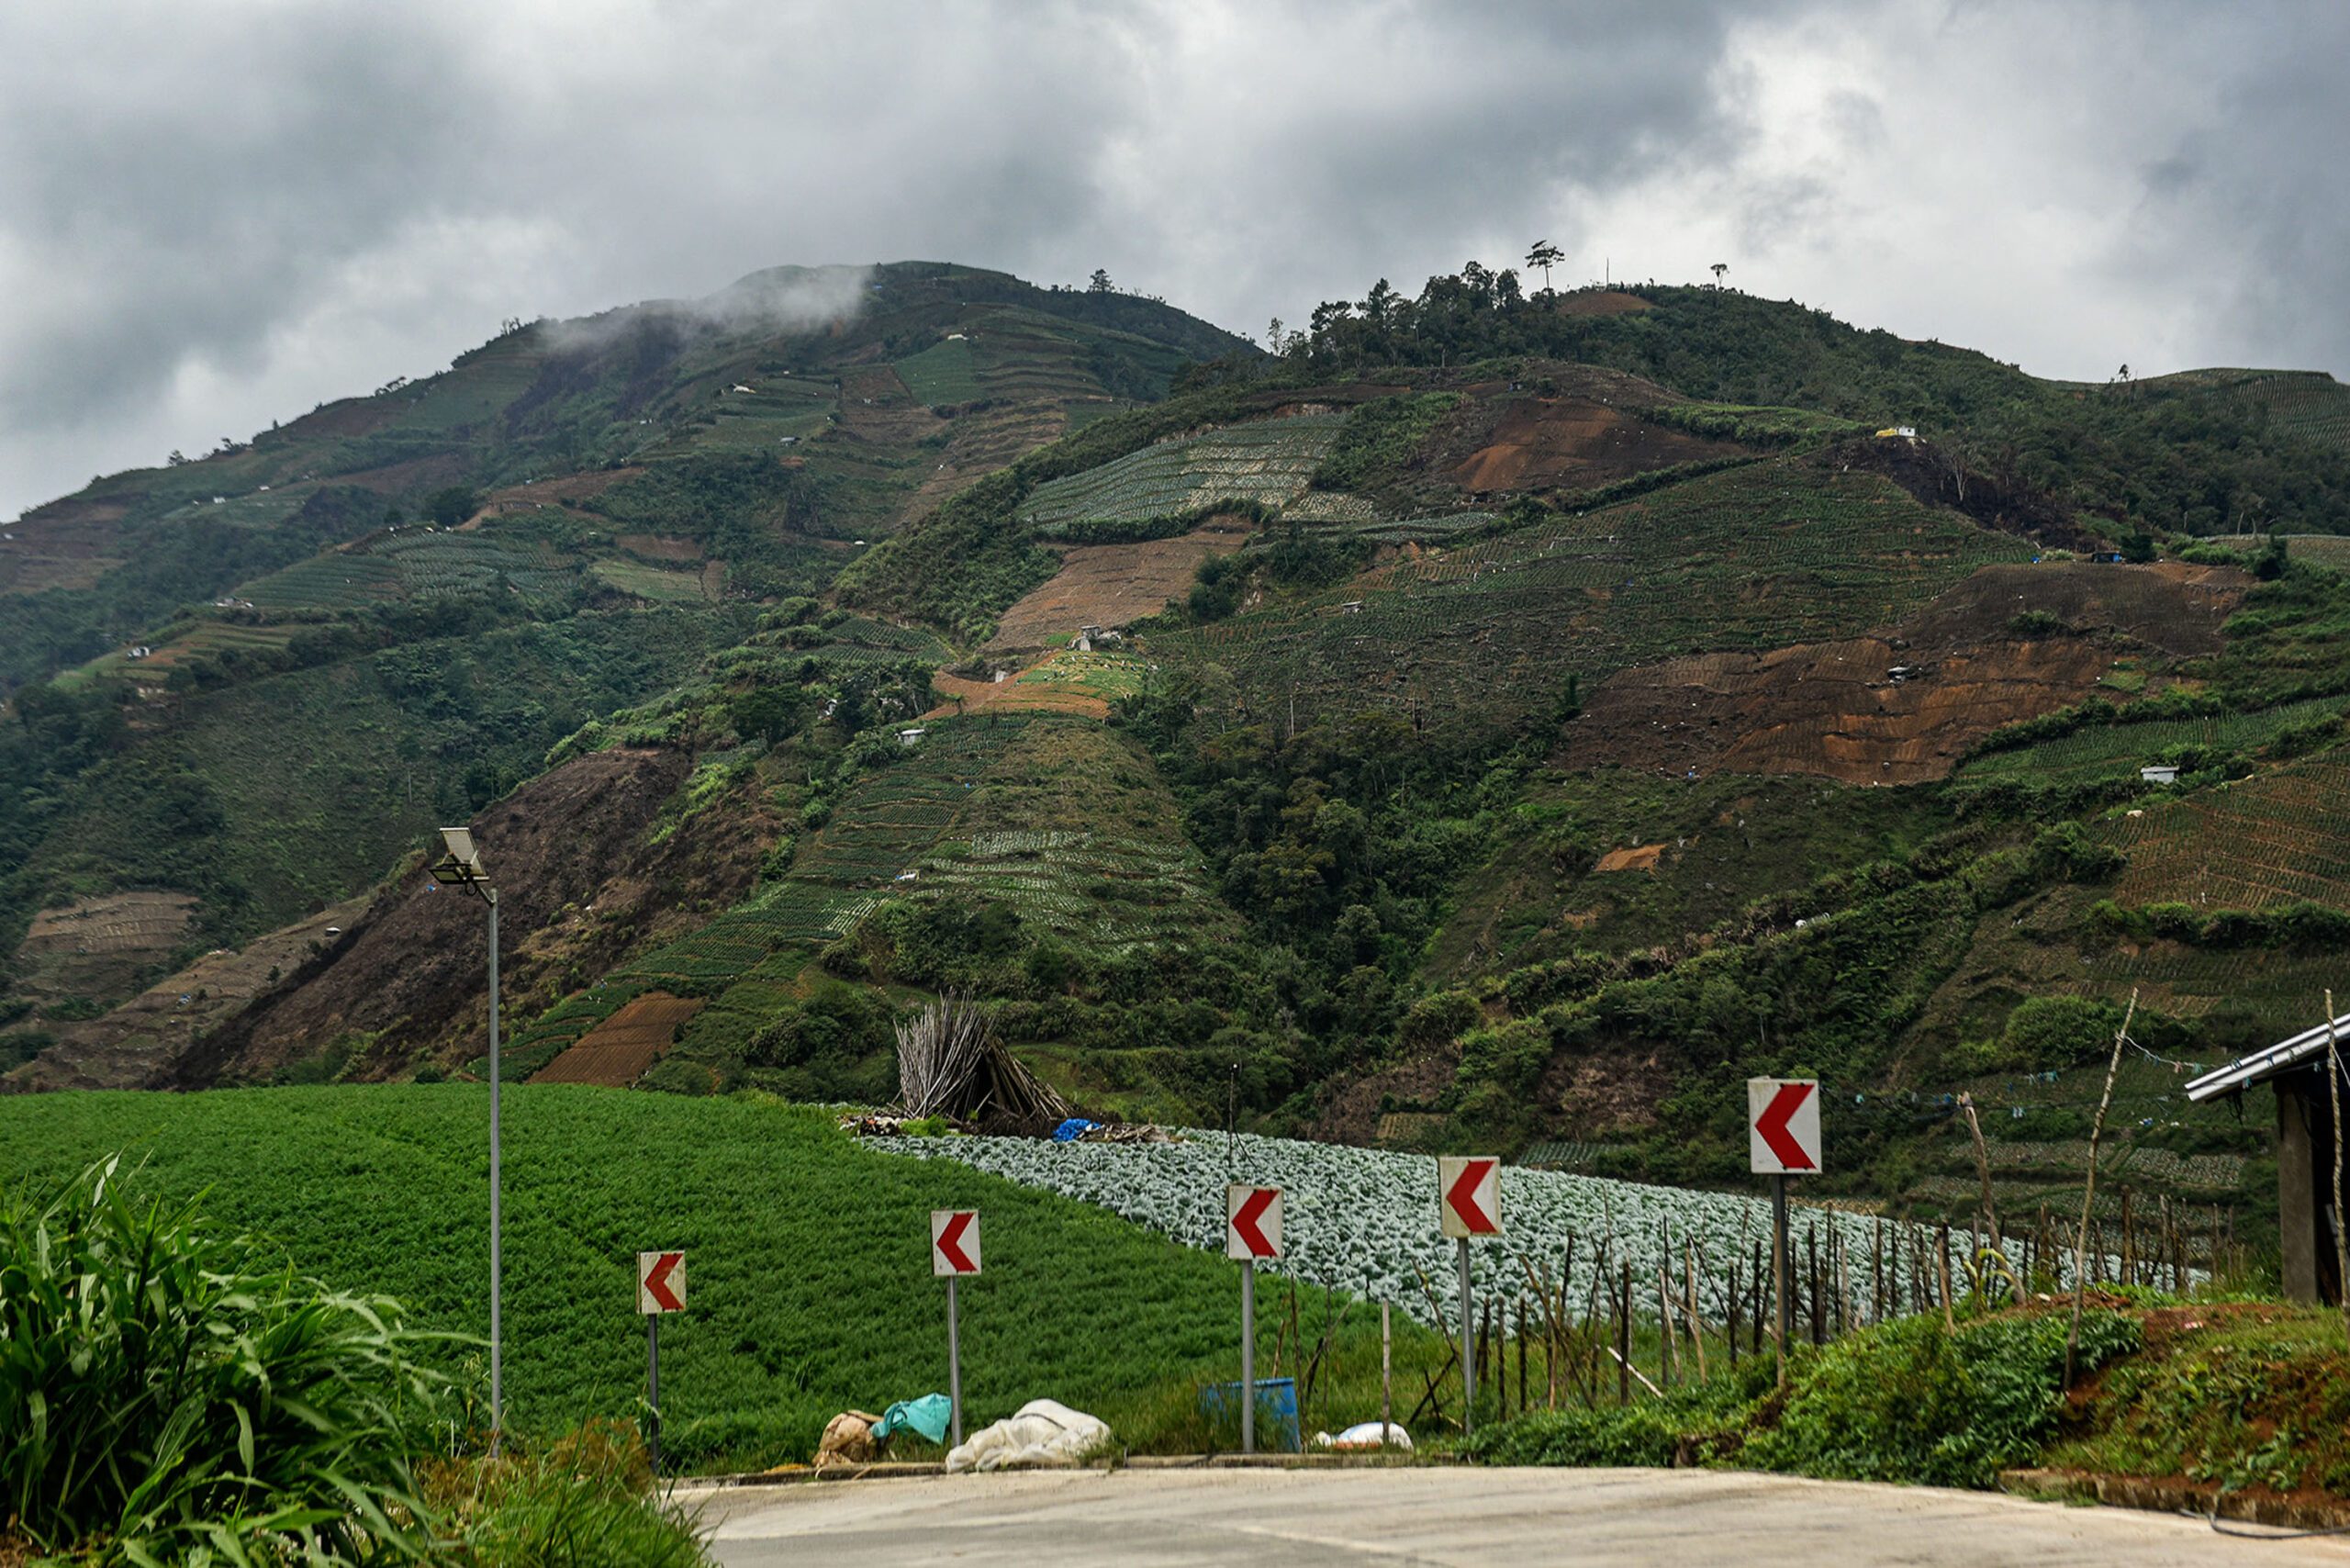 IN PHOTOS: The road to the vegetable gardens of Tinoc, Ifugao